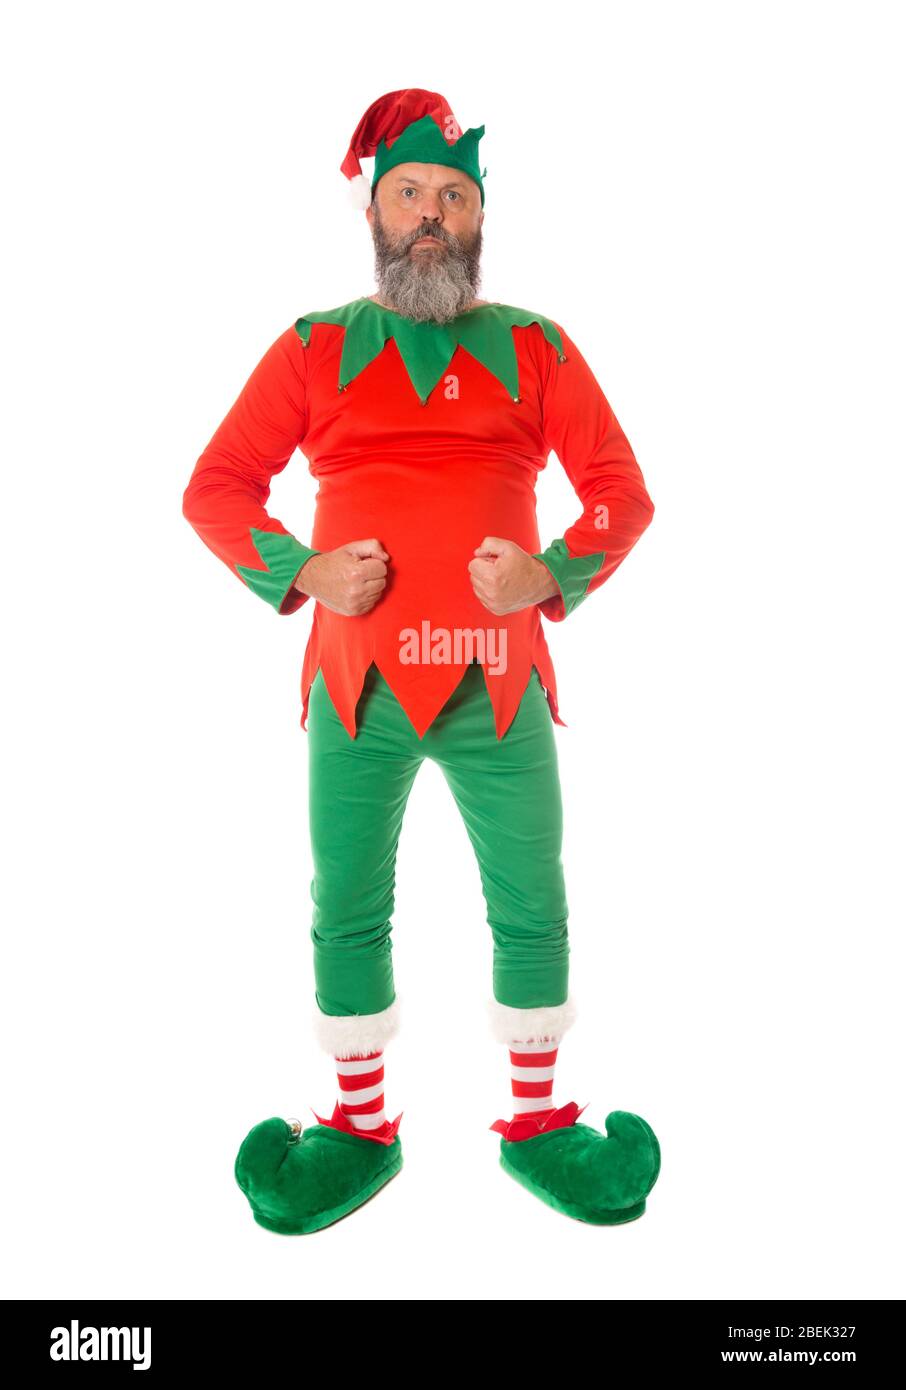 A Christmas Elf in an aggressive strong stance, possibly a security guard - fun concepts. Stock Photo